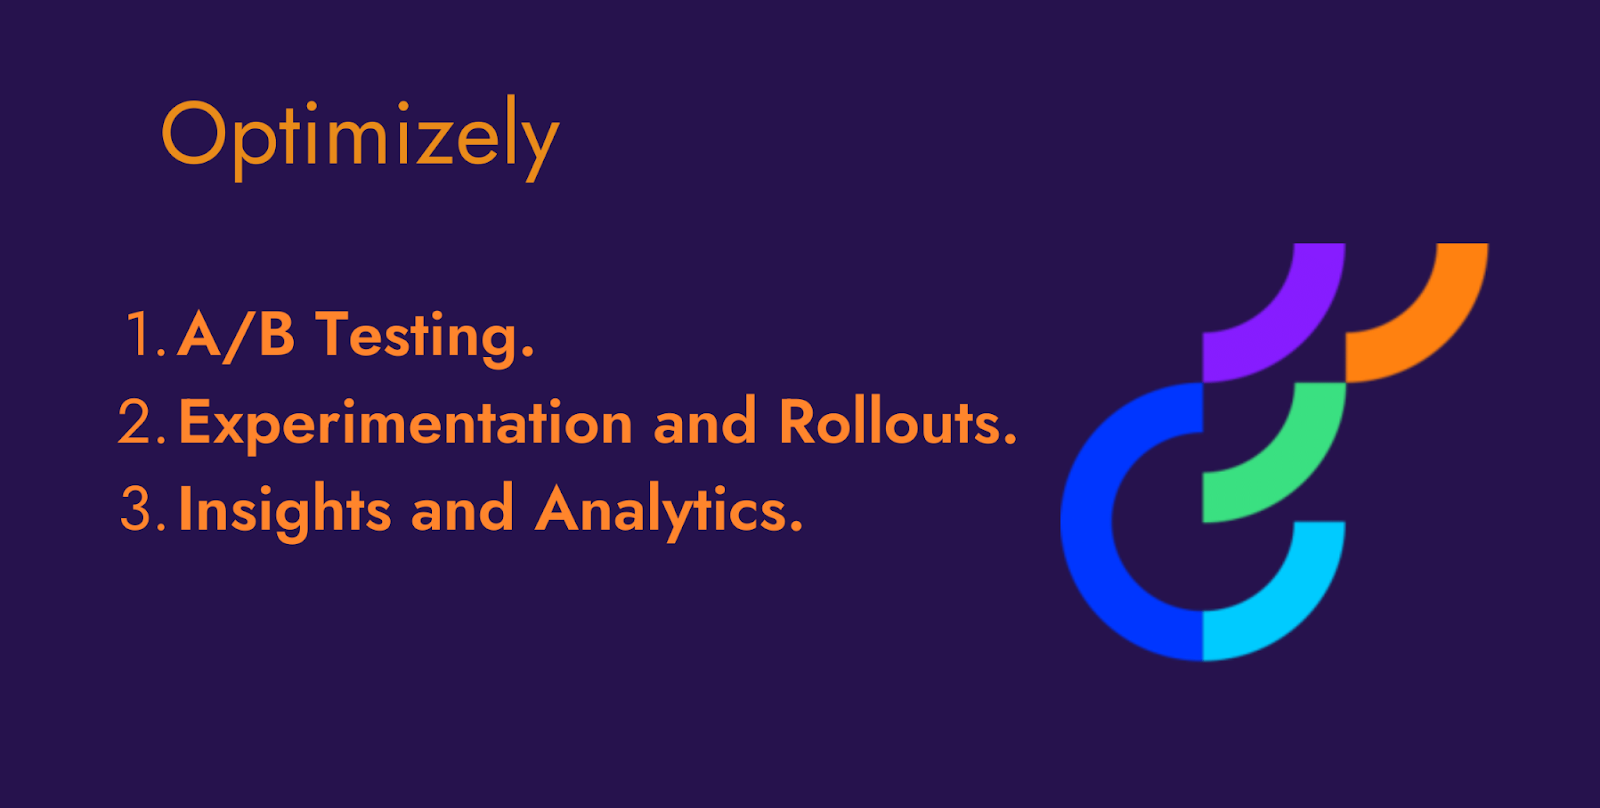 Features of Optimizely (Top CRO Tool)